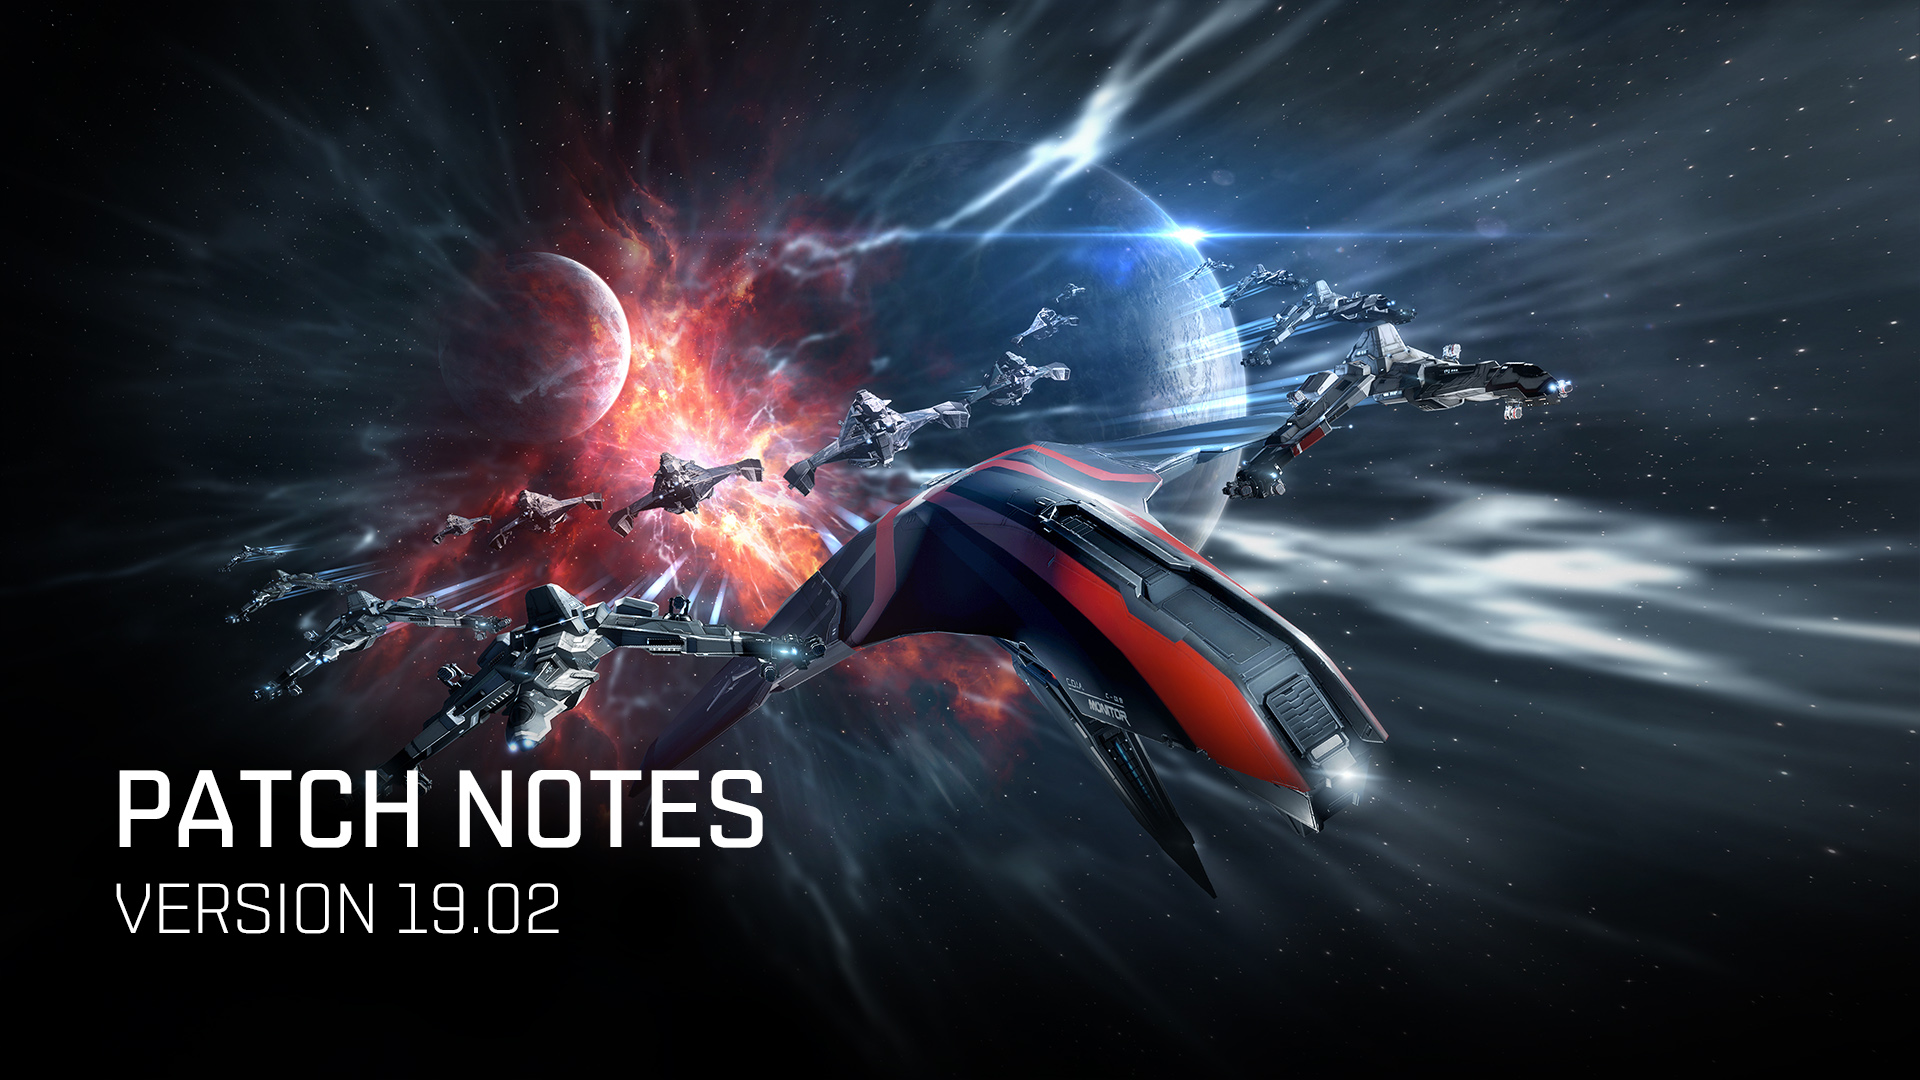 These daily log-in rewards are tweaking - Player Features & Ideas - EVE  Online Forums